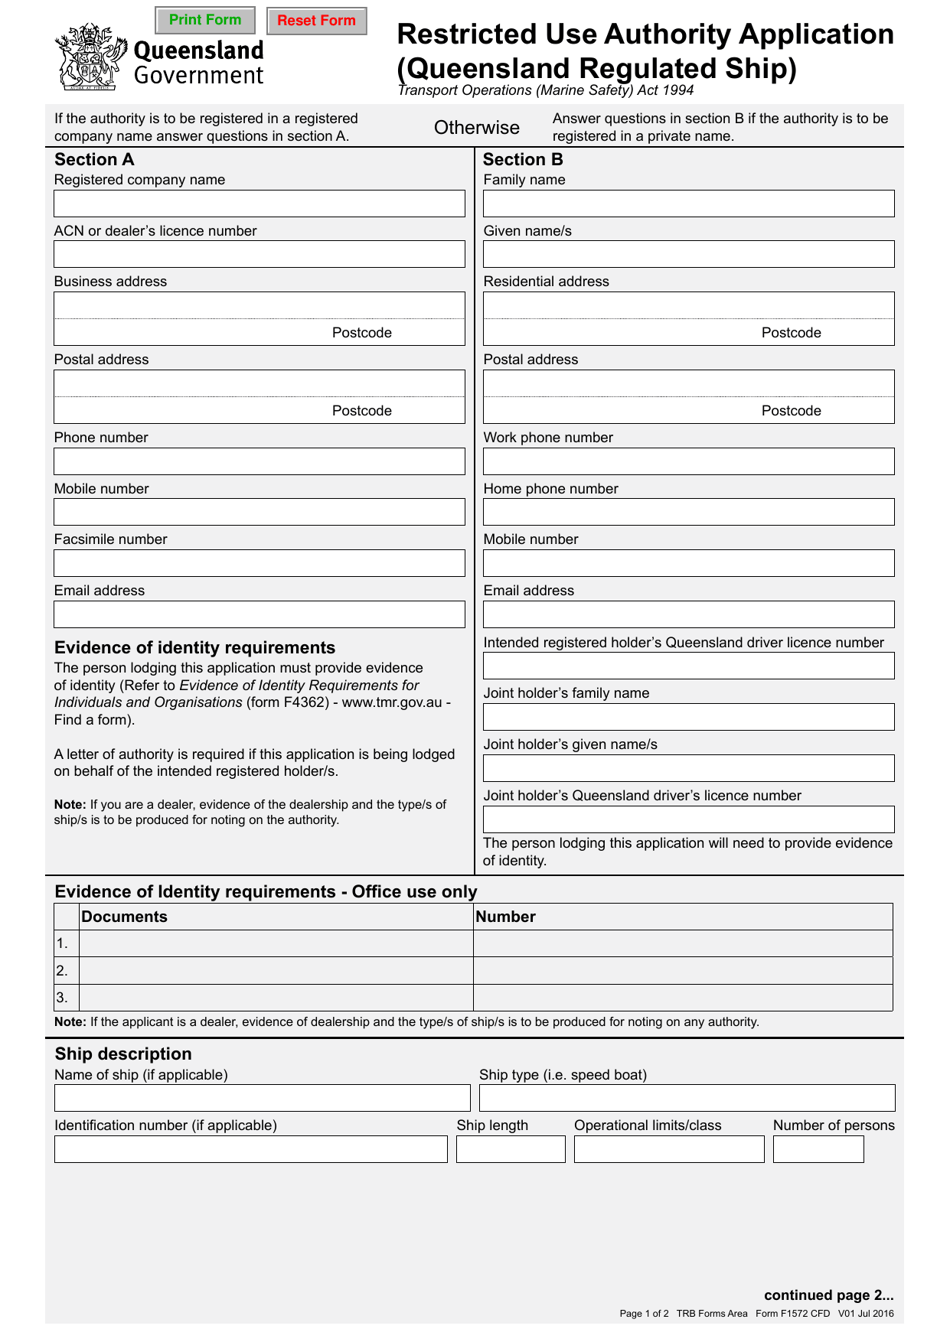 Form F1572 Restricted Use Authority Application (Queensland Regulated Ship) - Queensland, Australia, Page 1